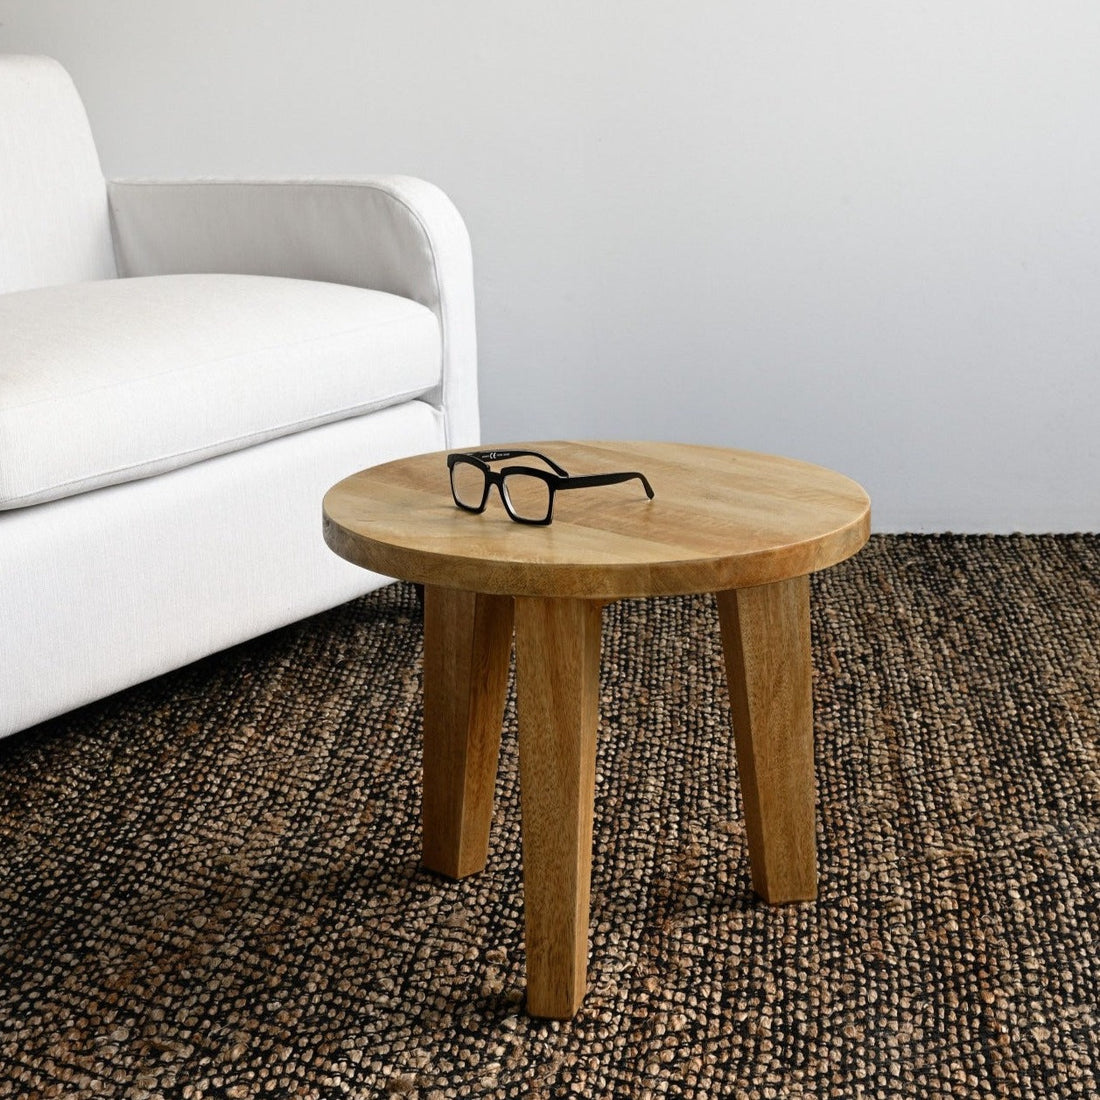 Gili Coffee Table 50cm in natural finish - Furniture